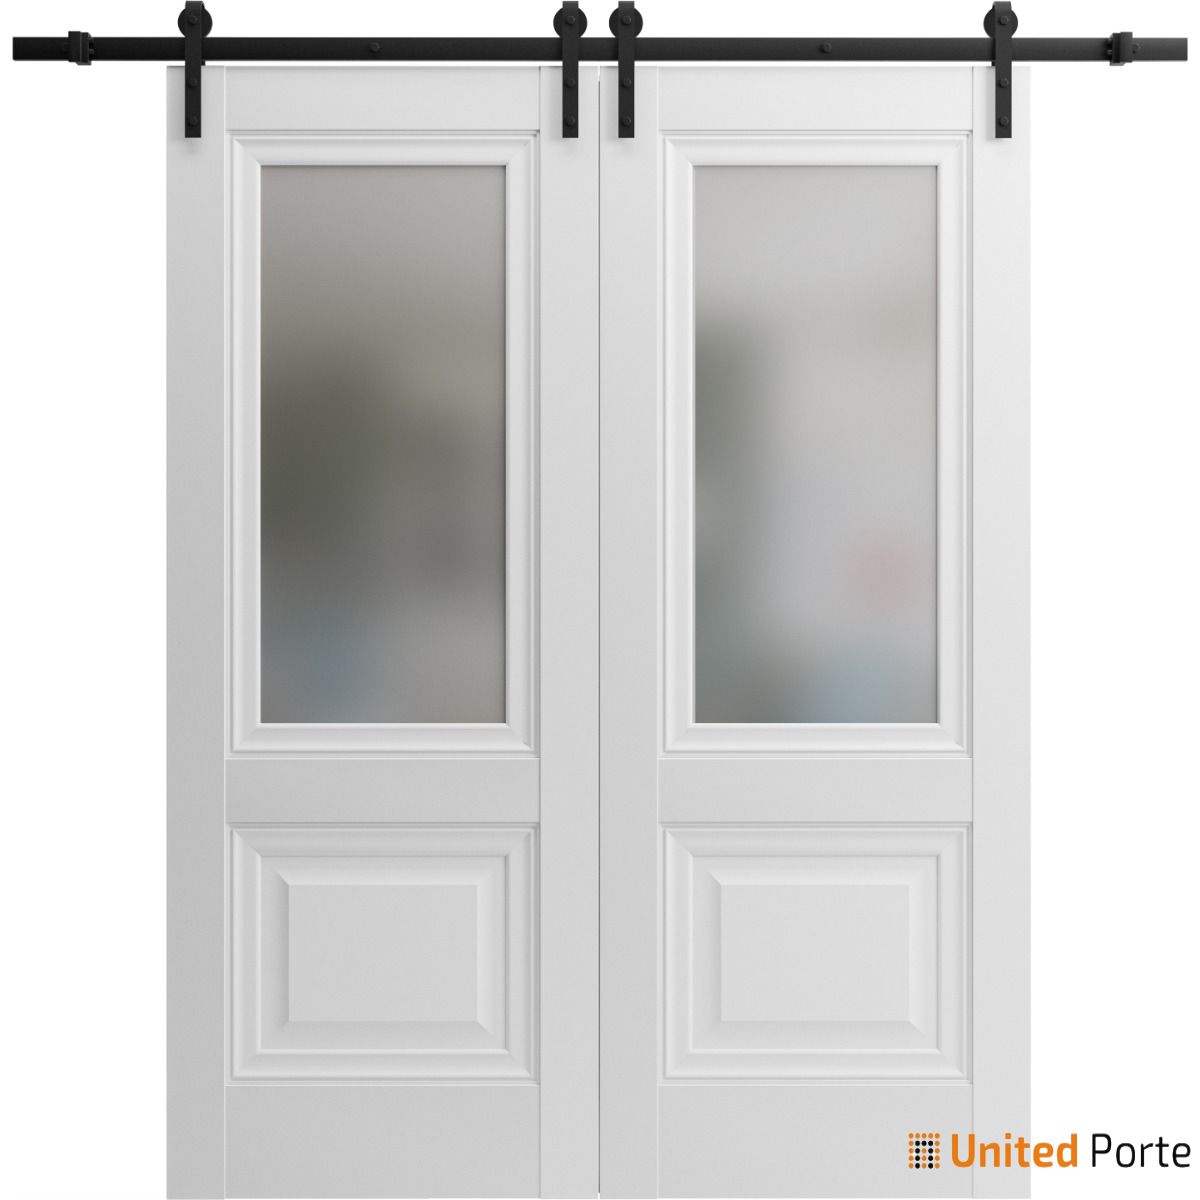 Lucia 8822 White Silk Double Barn Door with Frosted Glass and Black Rail